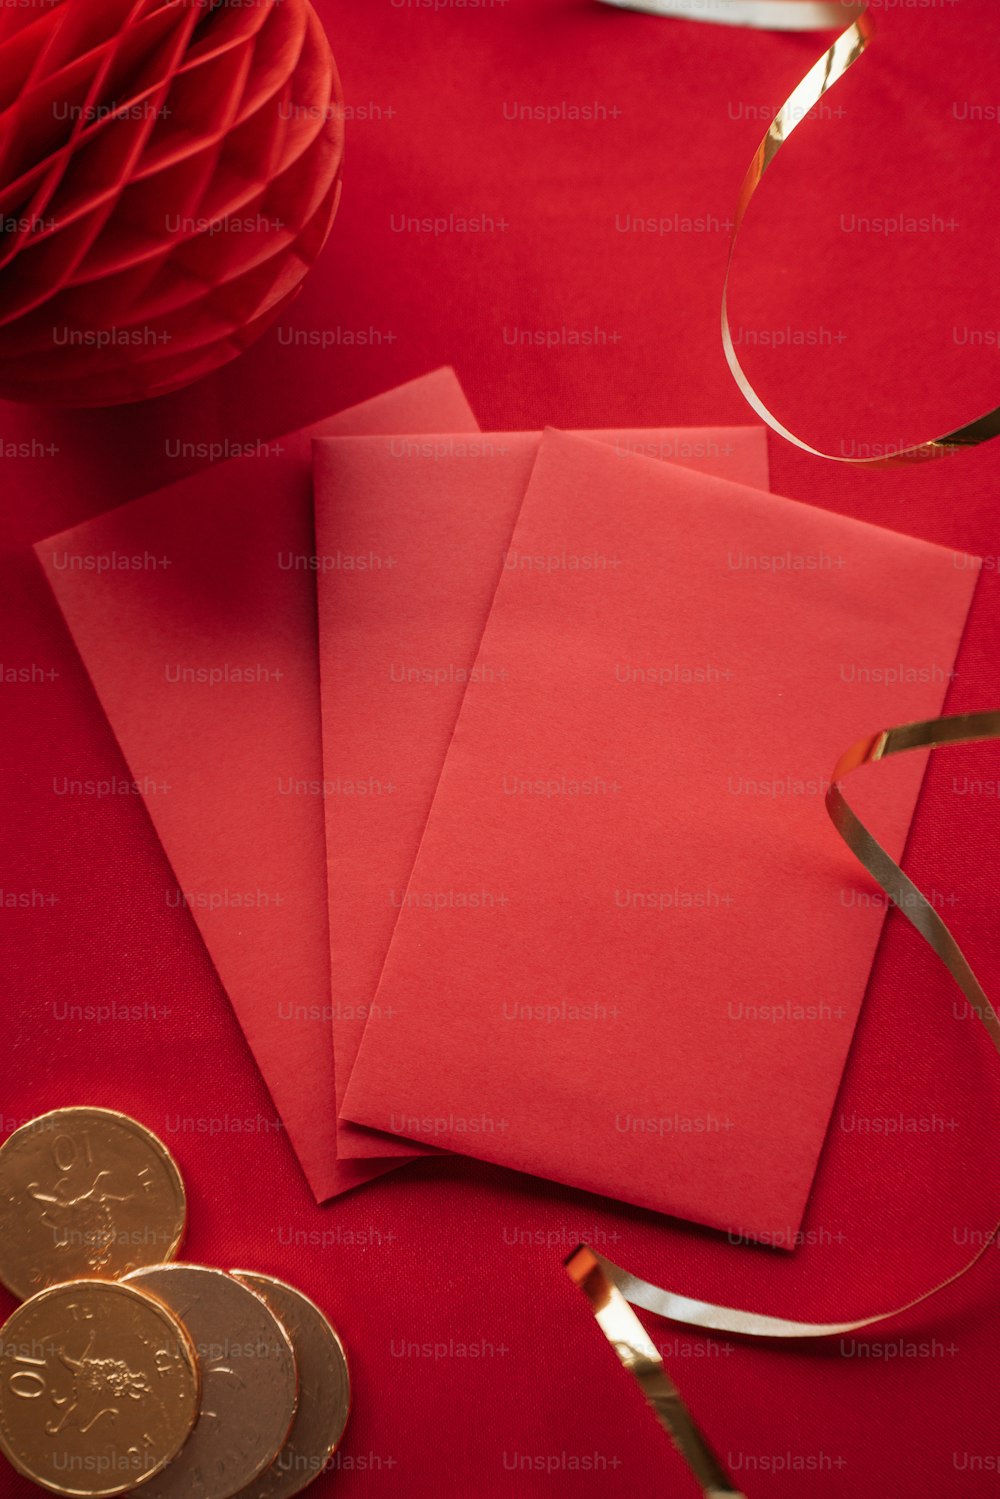 a red table topped with red envelopes and gold coins